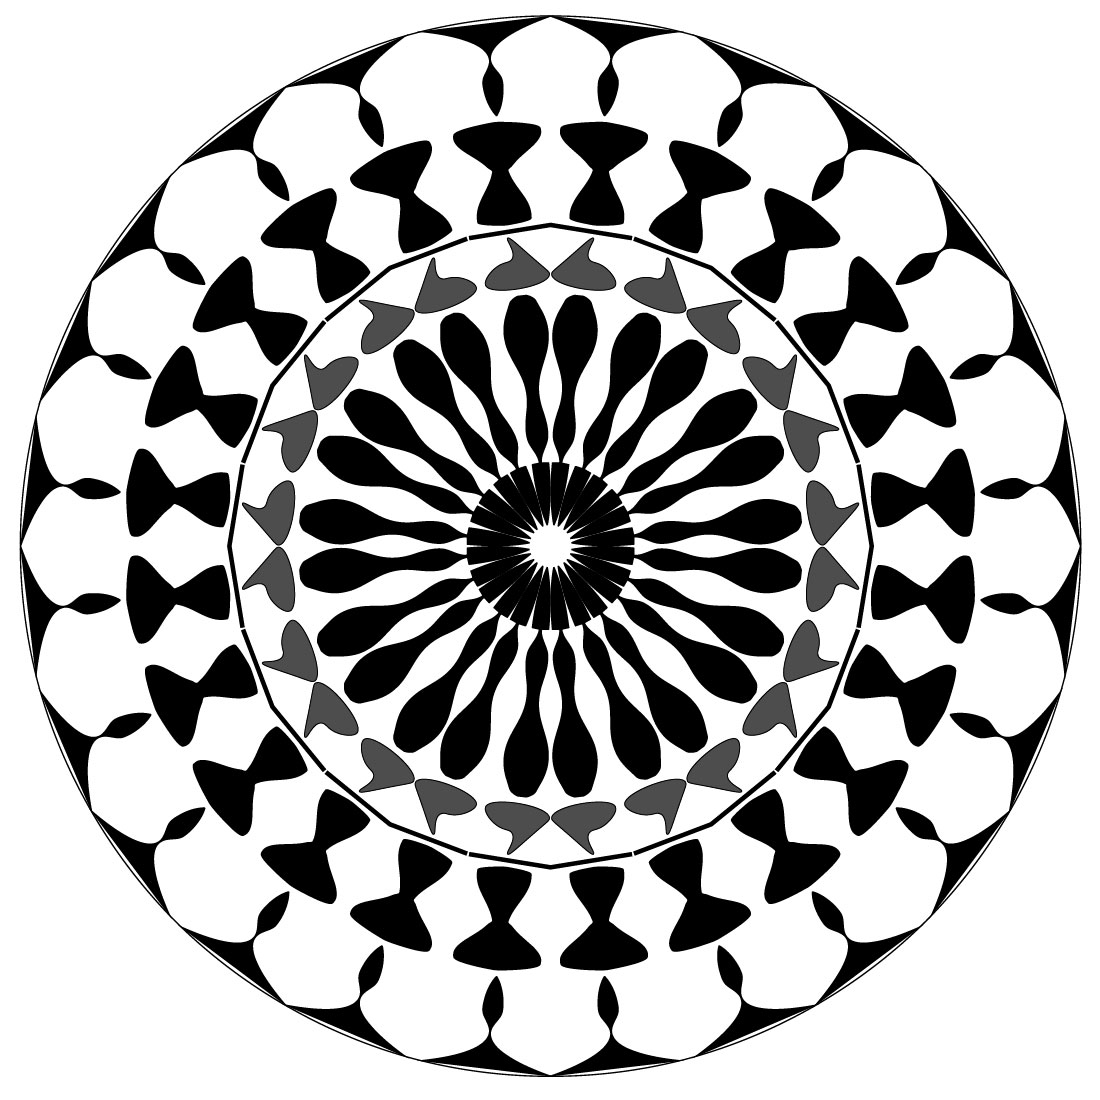 Mandala-Art-with-black-and-white-lotus-flowers preview image.